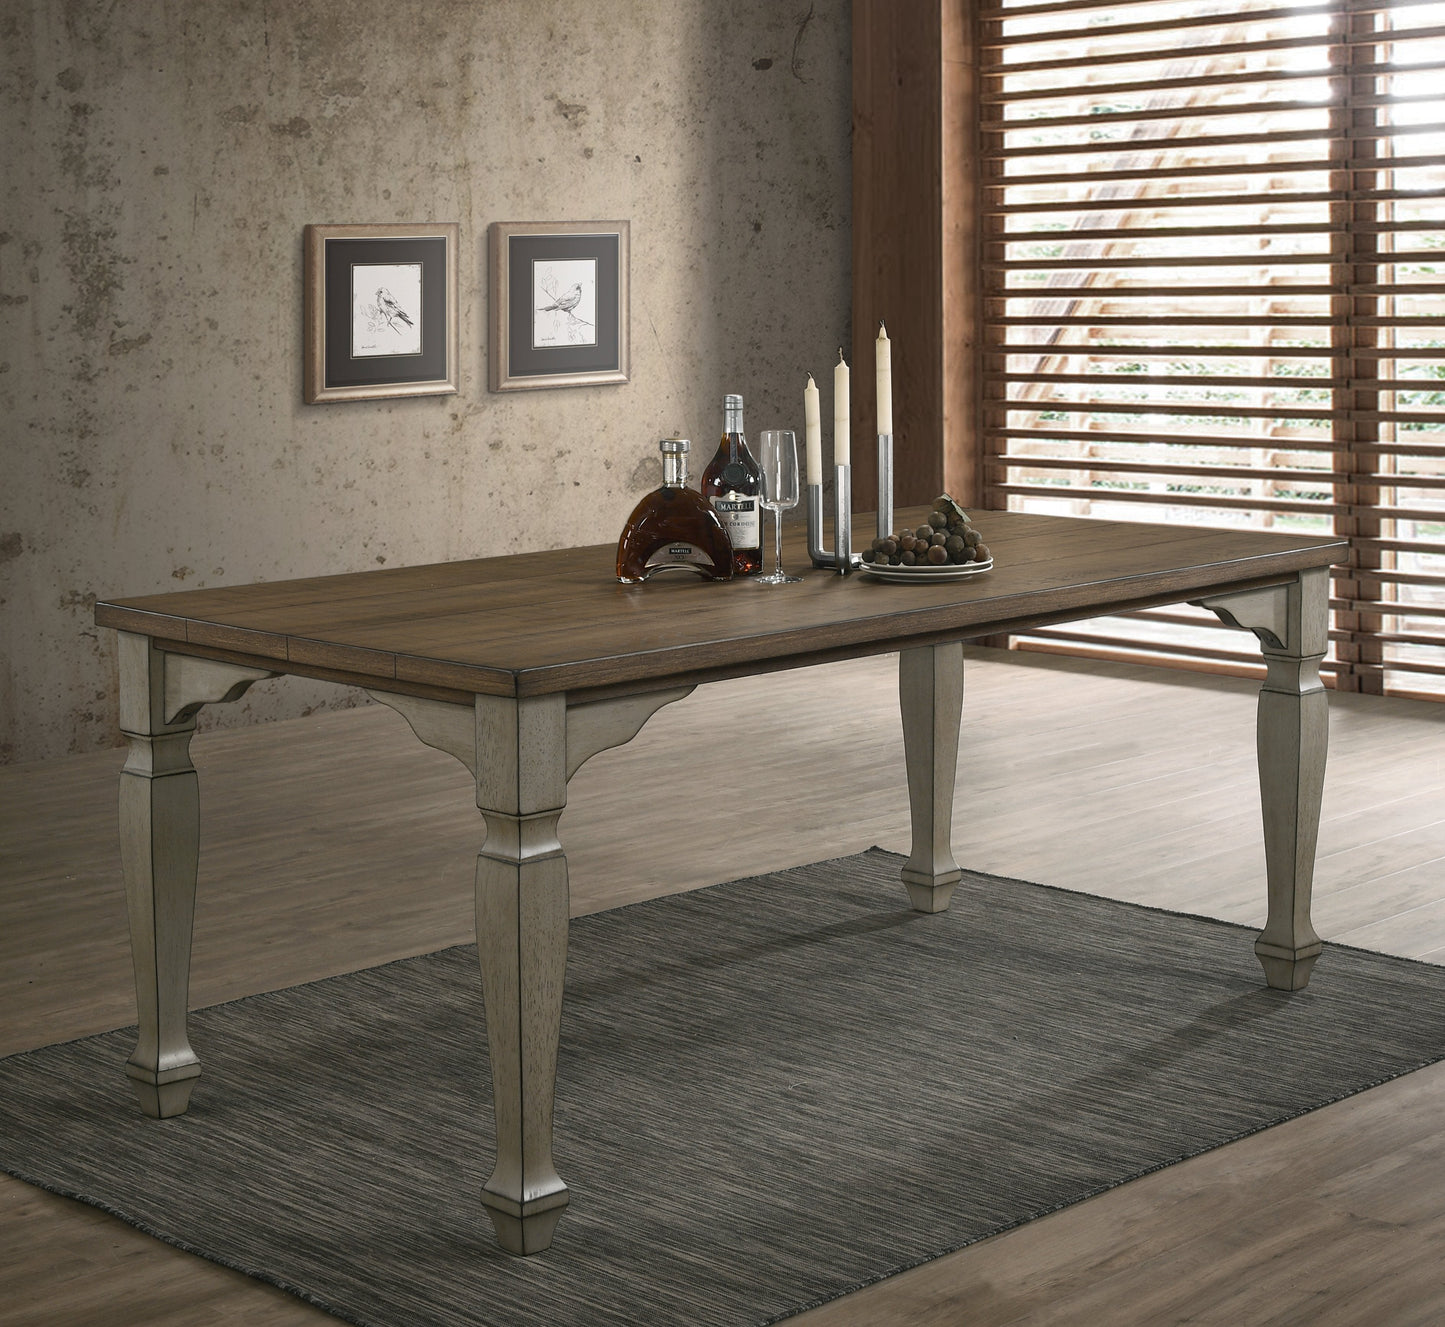 Breda Antique Gray and Dark Oak Finished Wood Dining Table